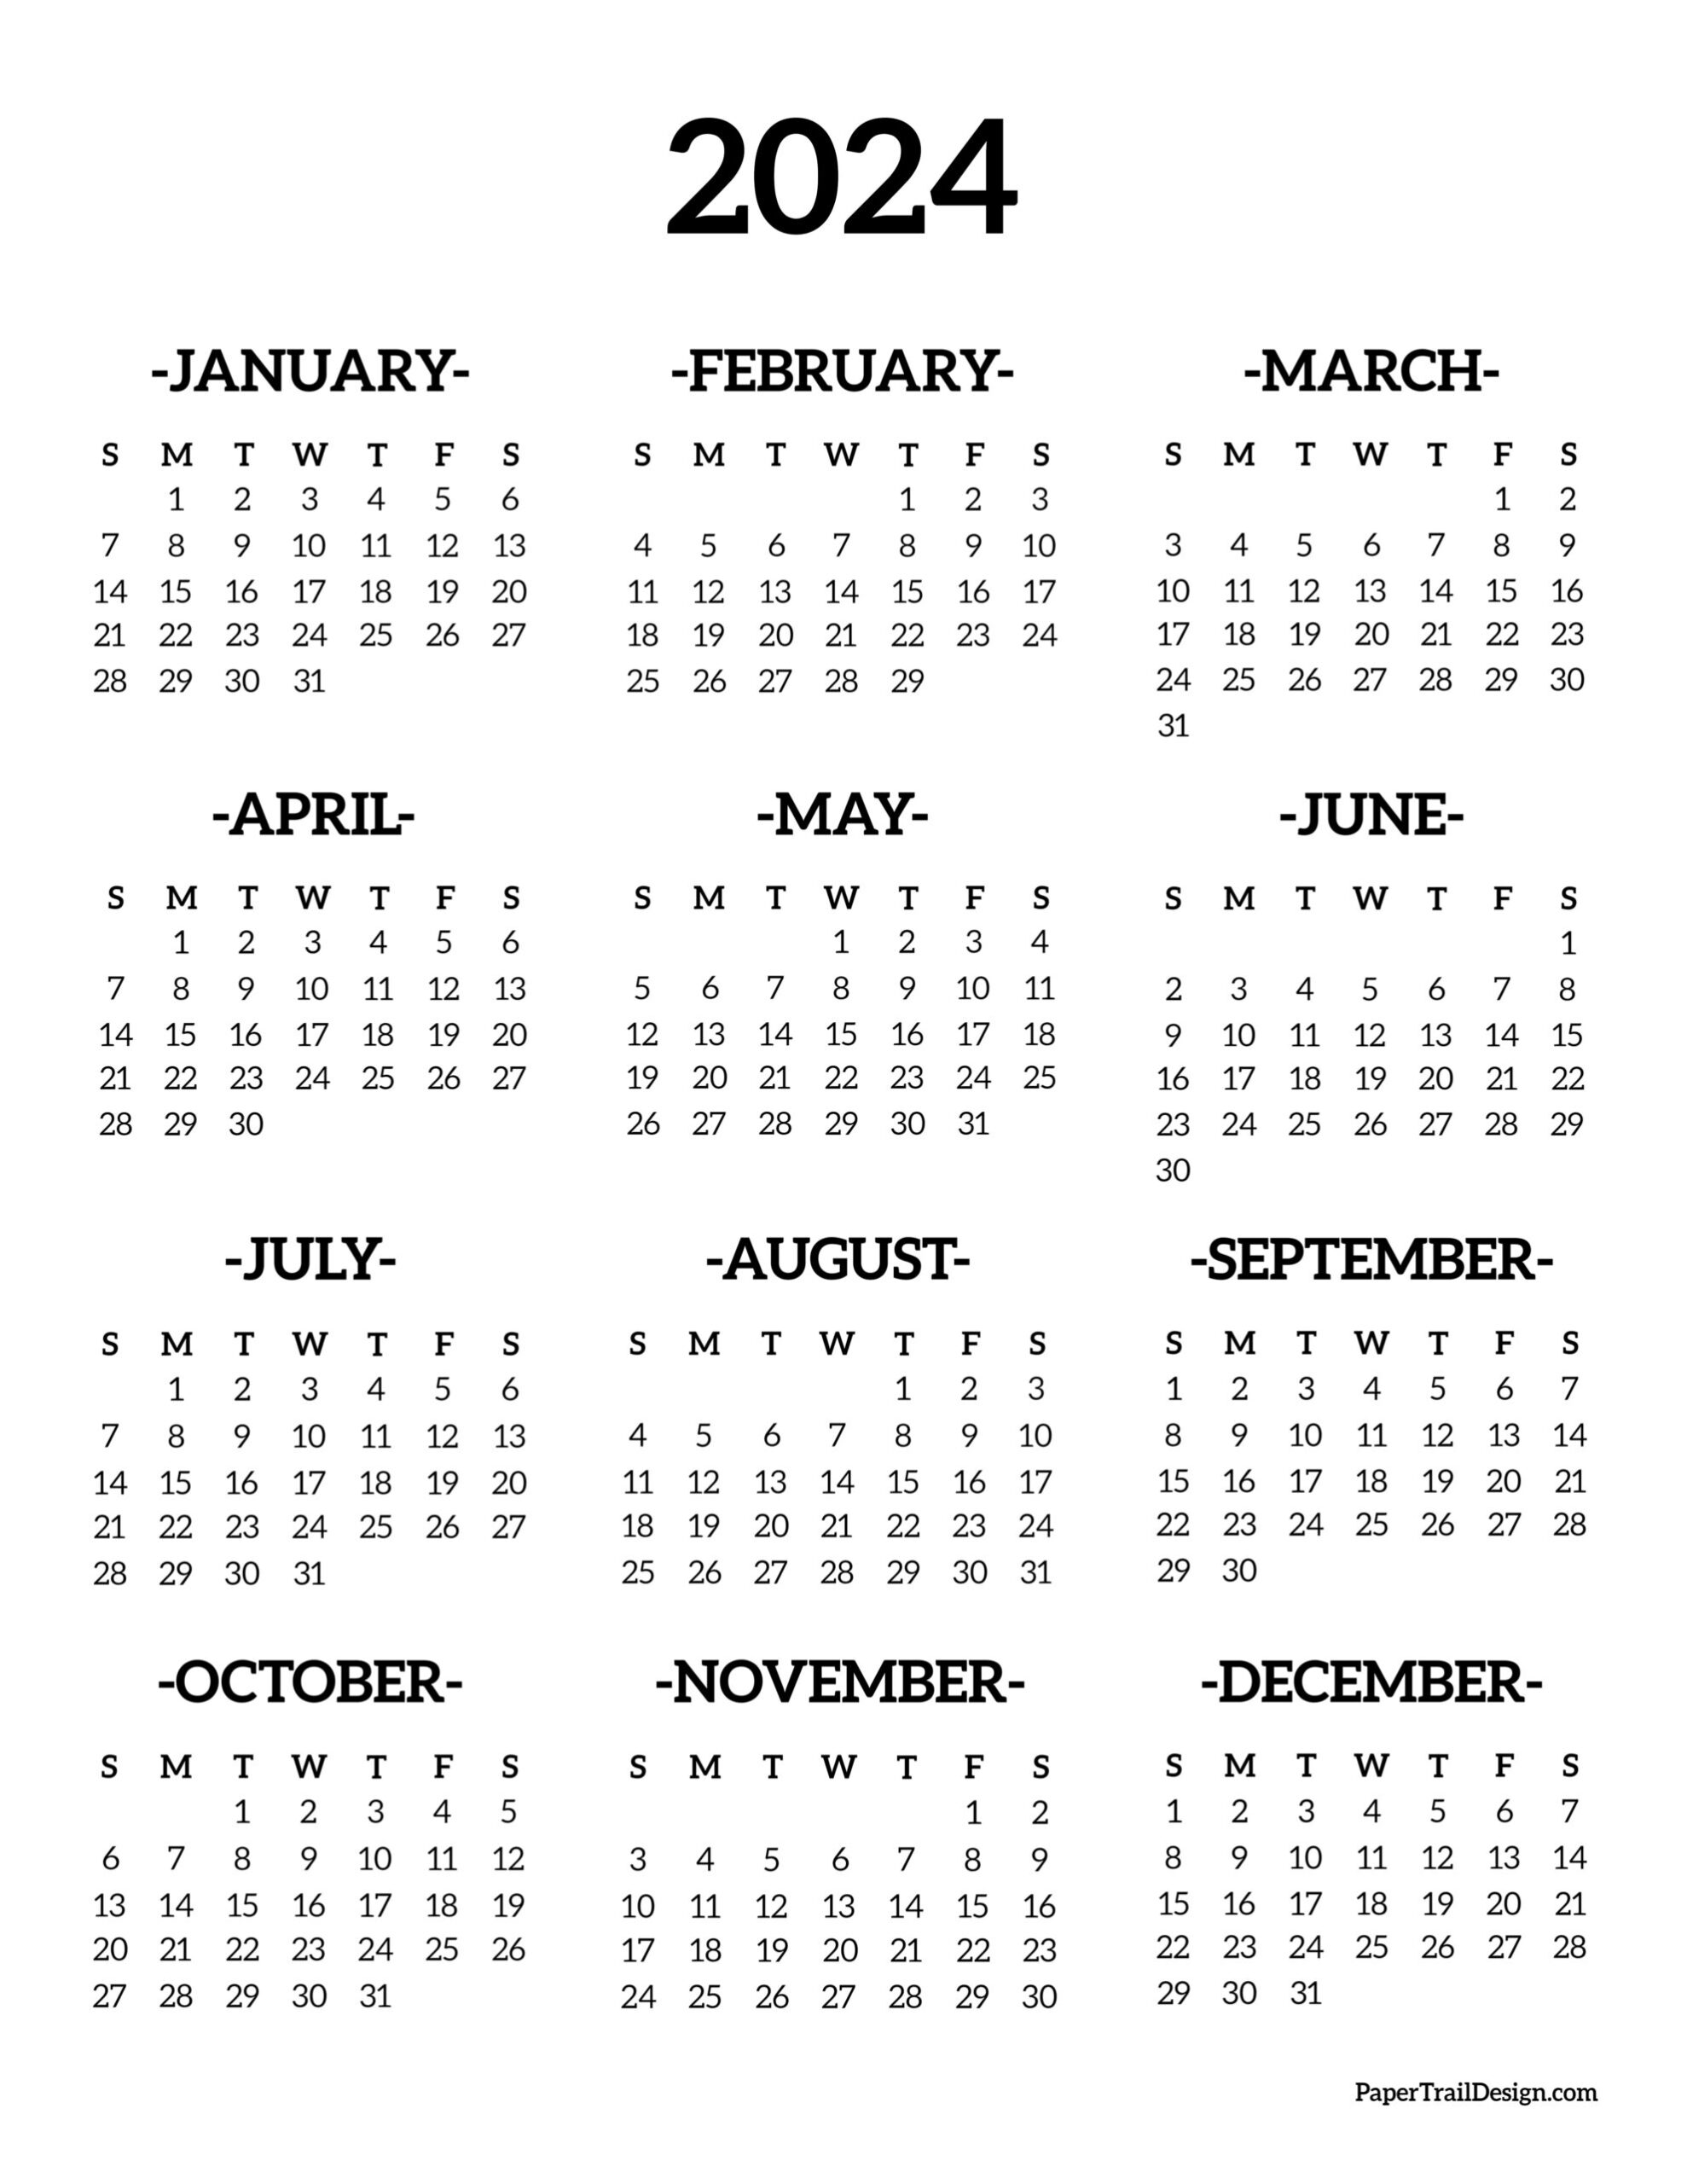 Calendar 2024 Printable One Page - Paper Trail Design for Yearly Printable Calendar 2024